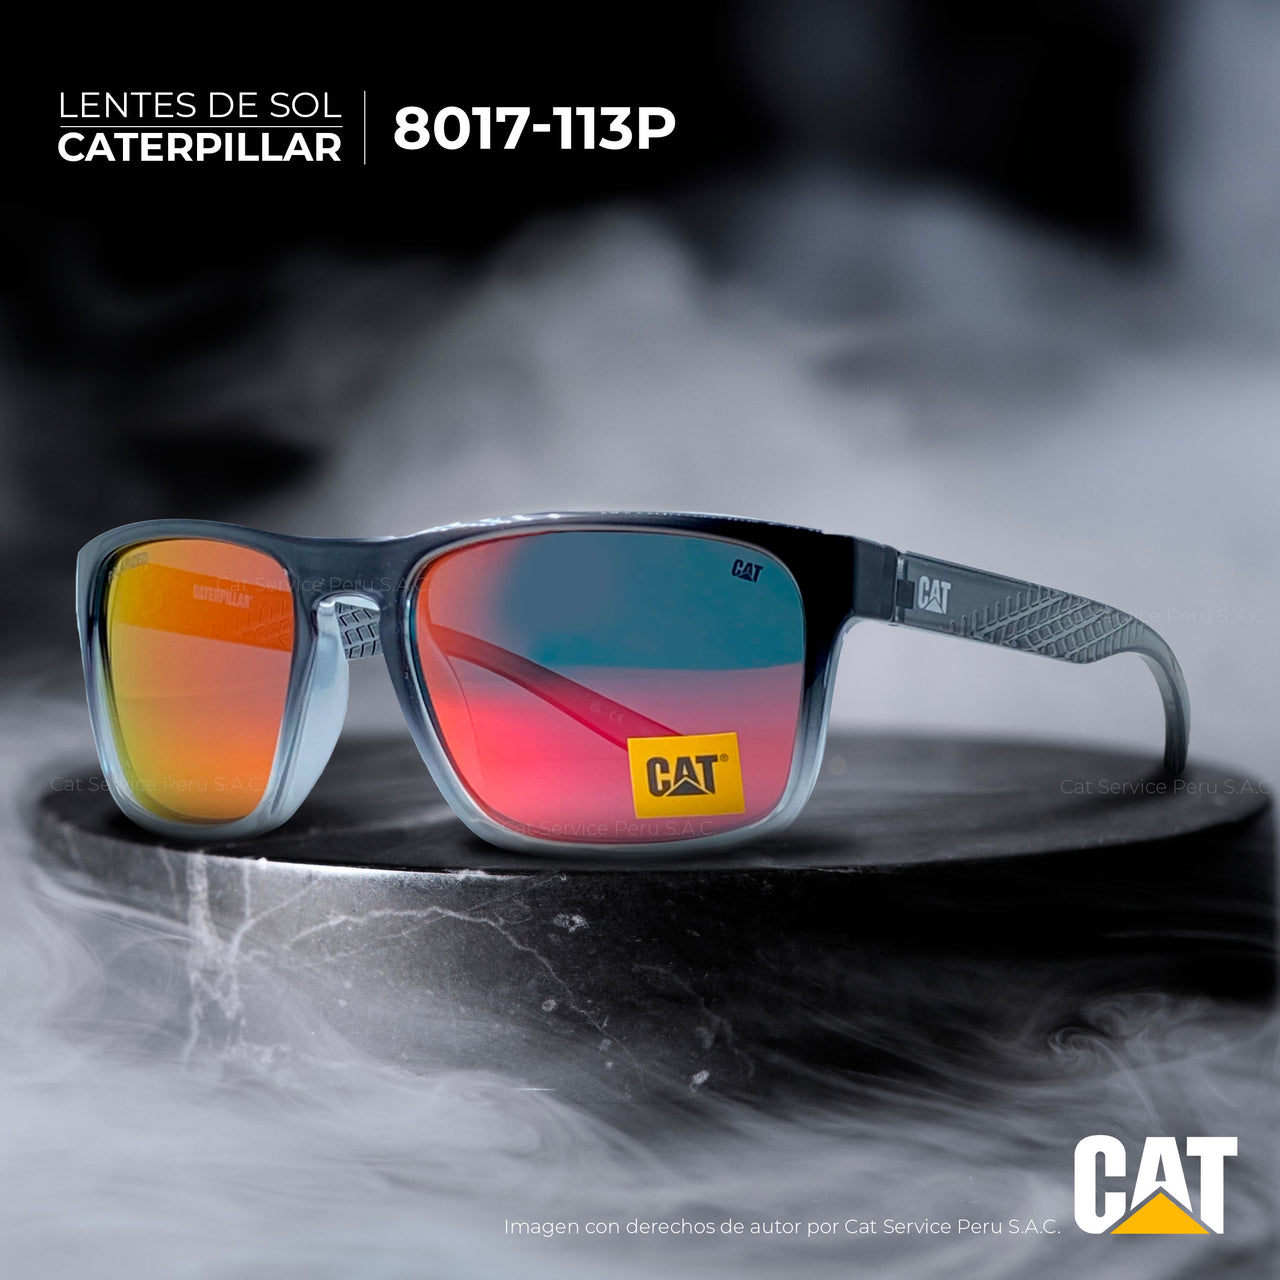 Cat CTS-8017-113P Polarized Red Moons Sunglasses 